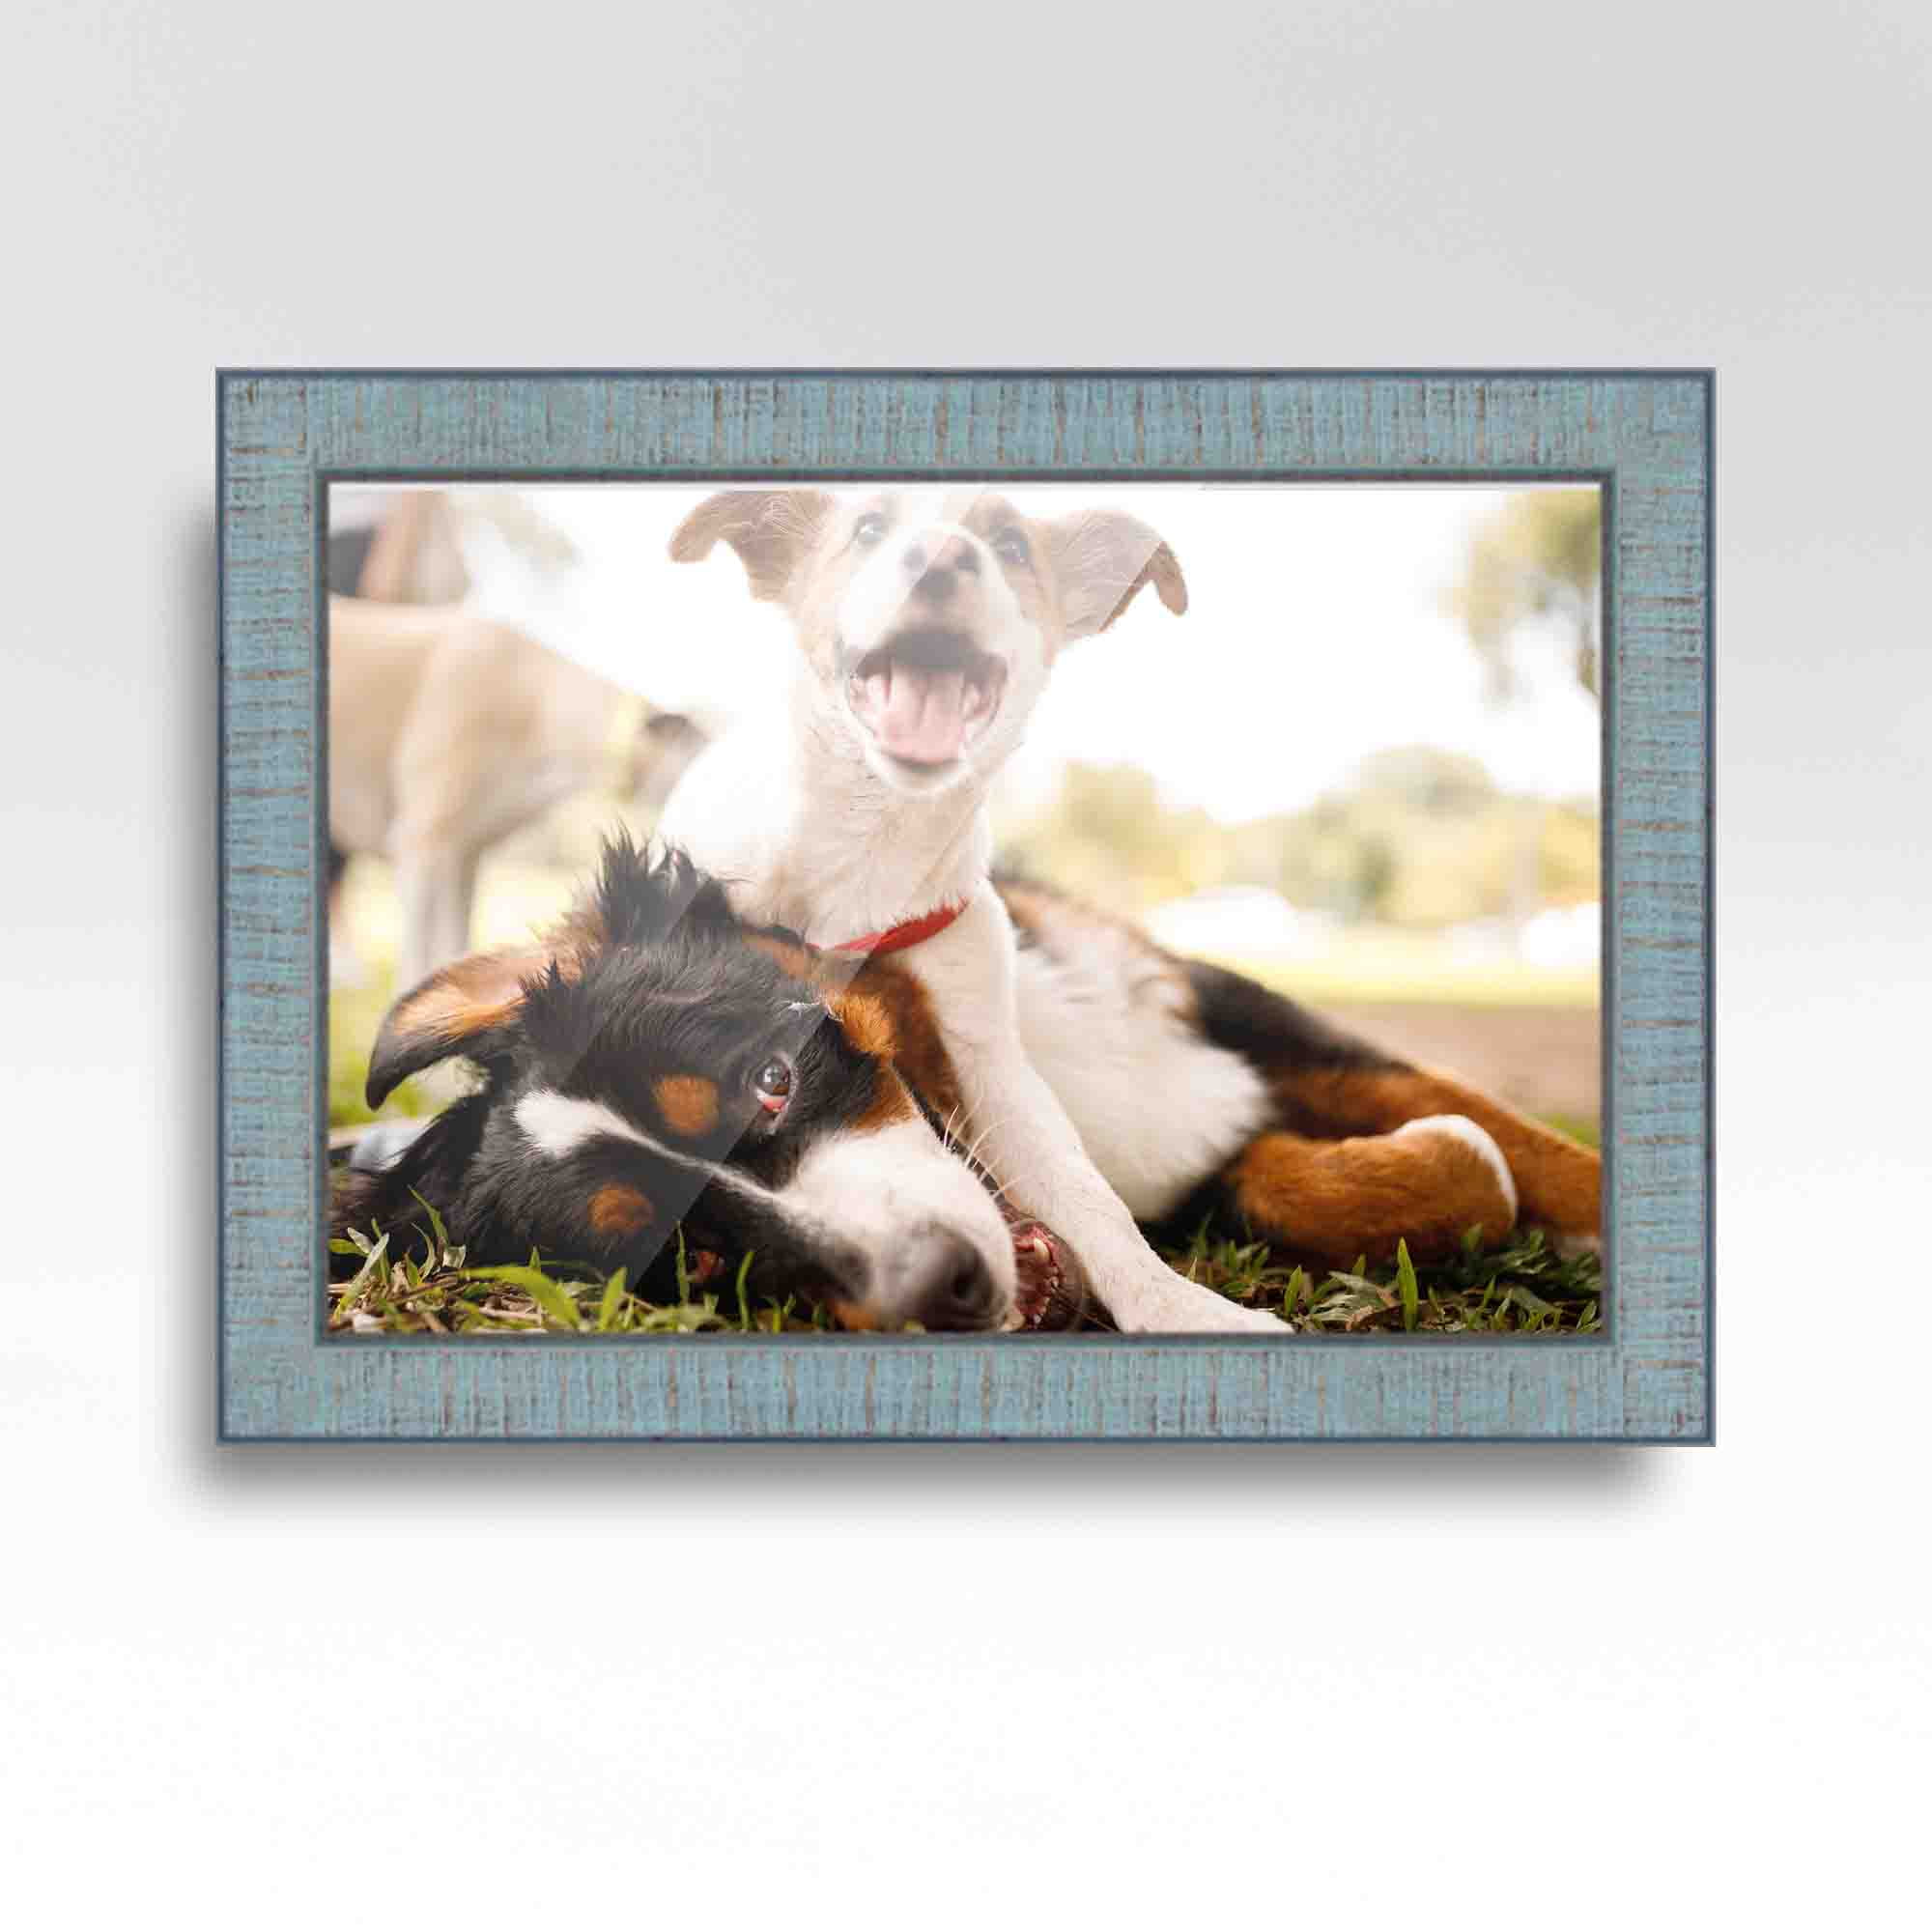 CustomPictureFrames 30x40 Modern Black Wood Picture Frame - with Acrylic Front and Foam Board Backing